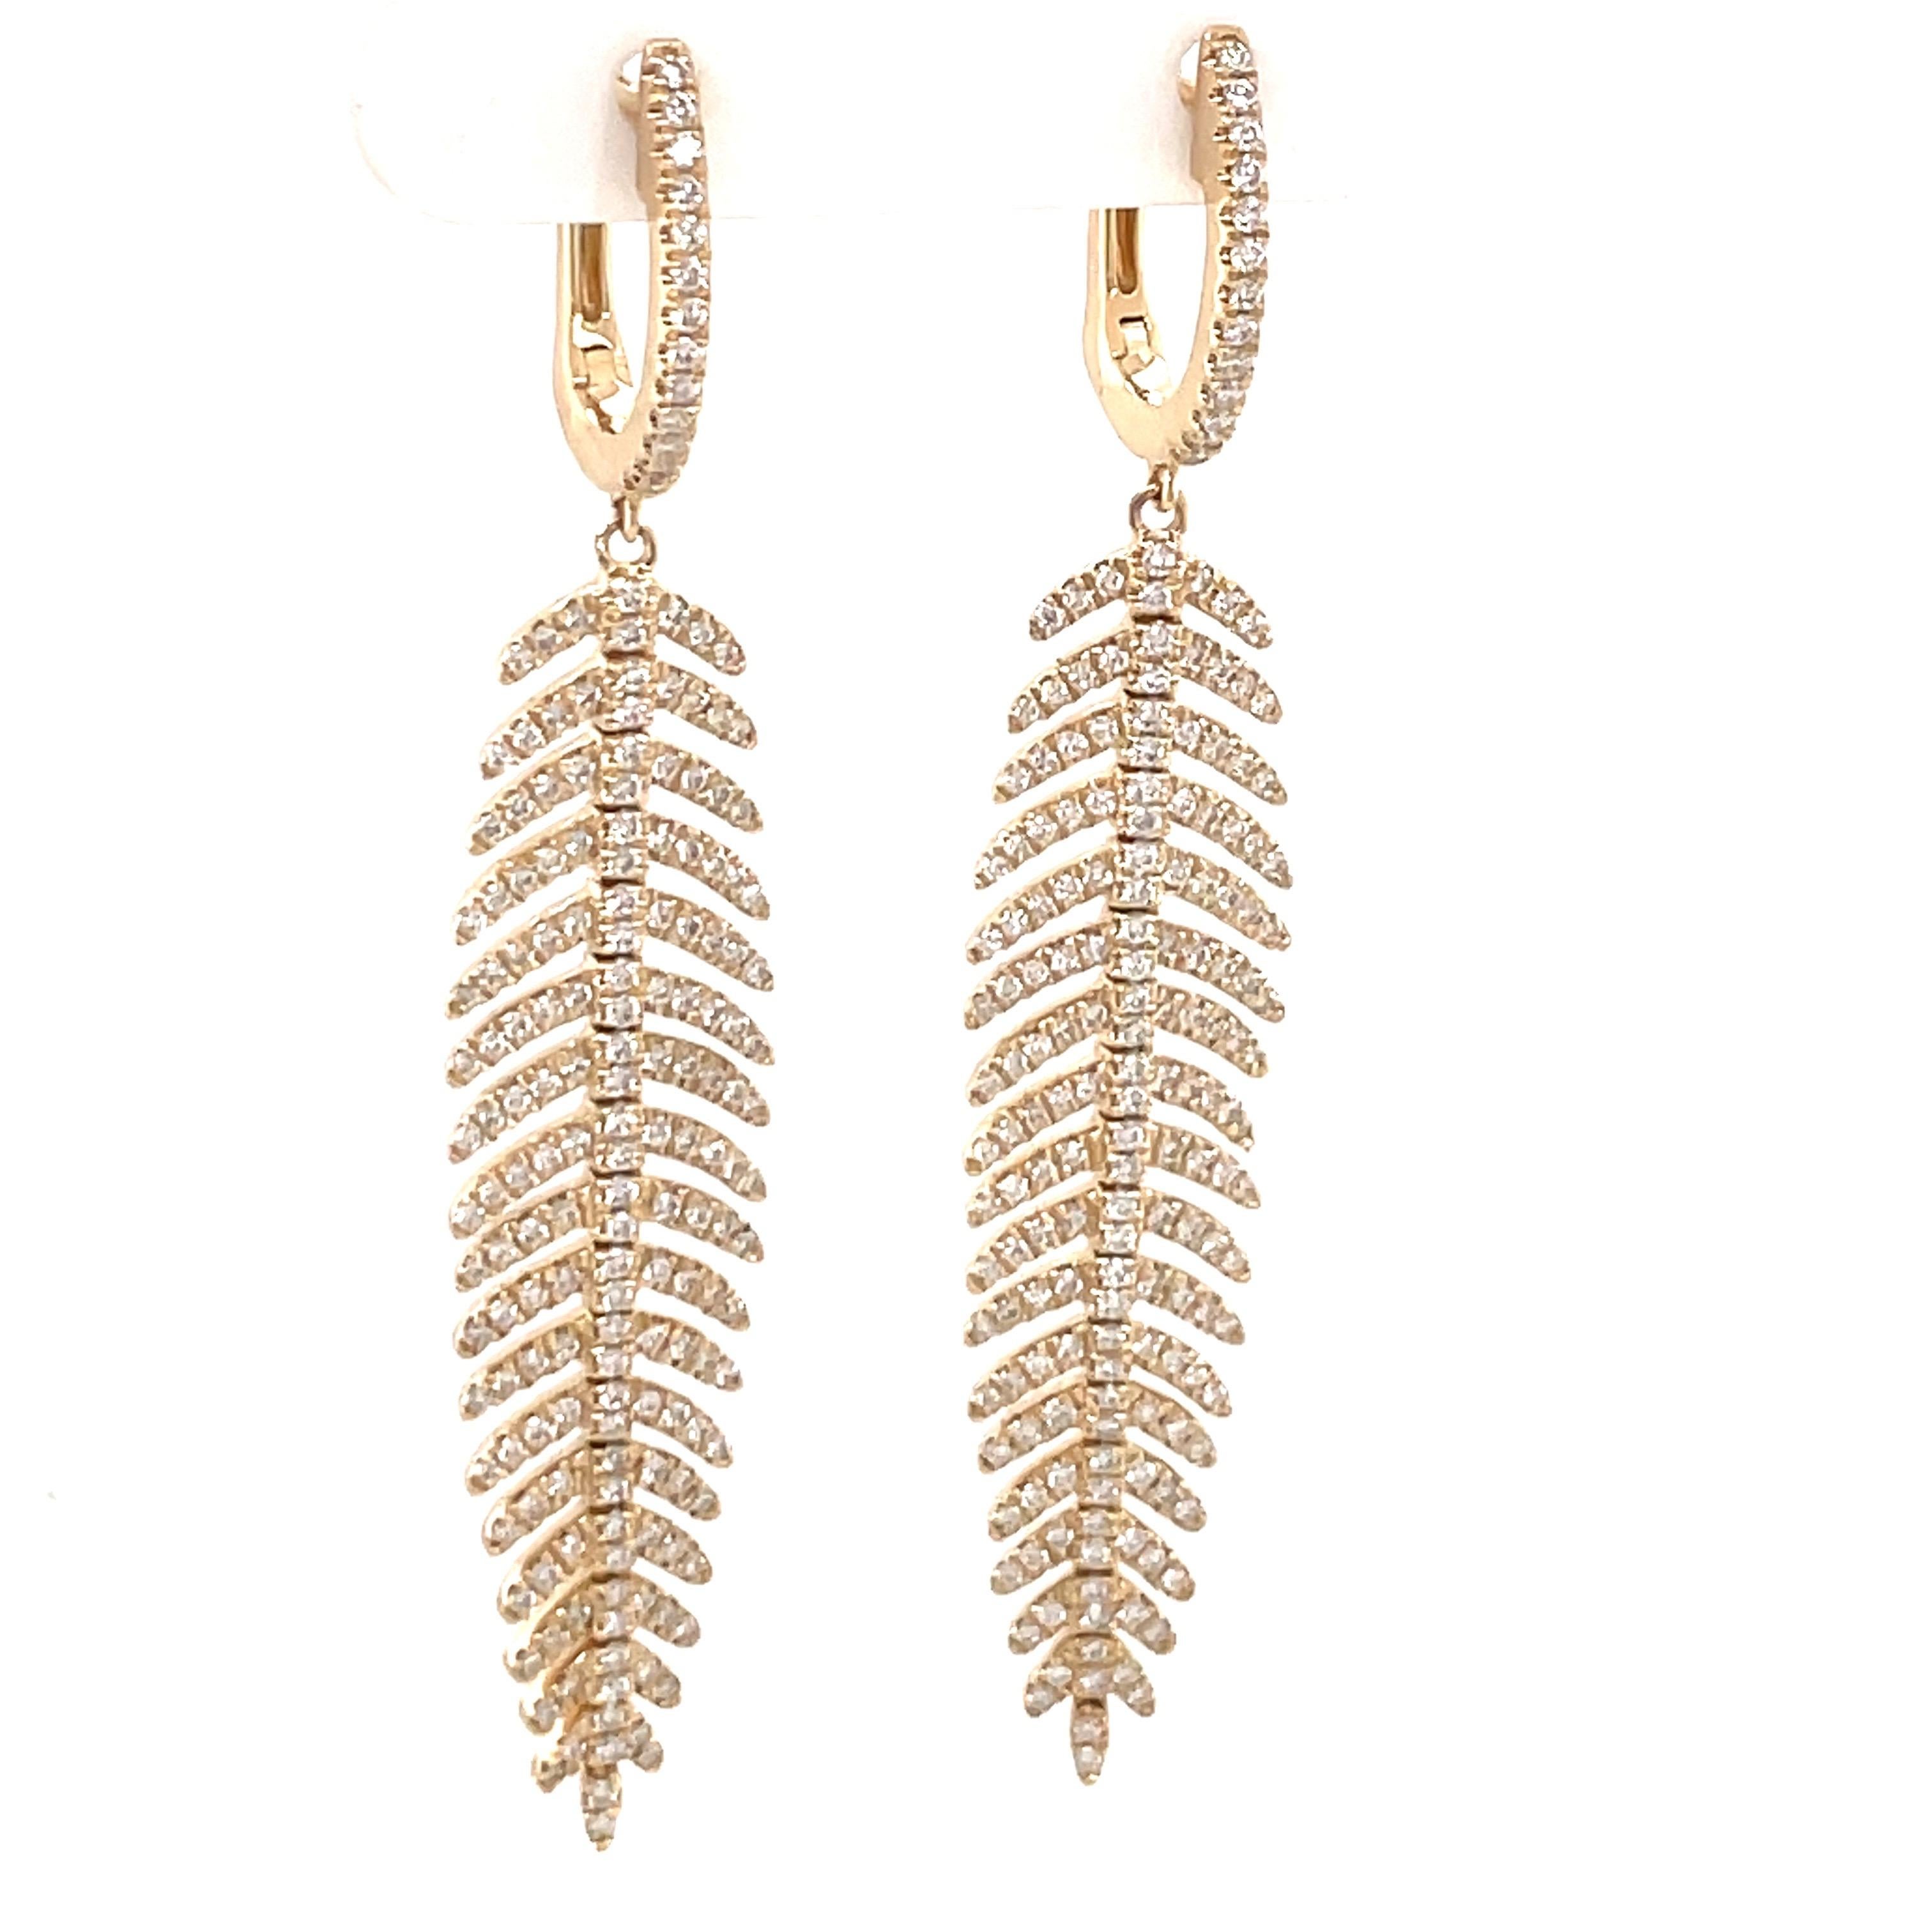 14 Karat Yellow gold drop earrings featuring 358 round brilliants in a feather motif weighing 1.28 carats.
Color G-H
Clarity SI

Available in white gold. 